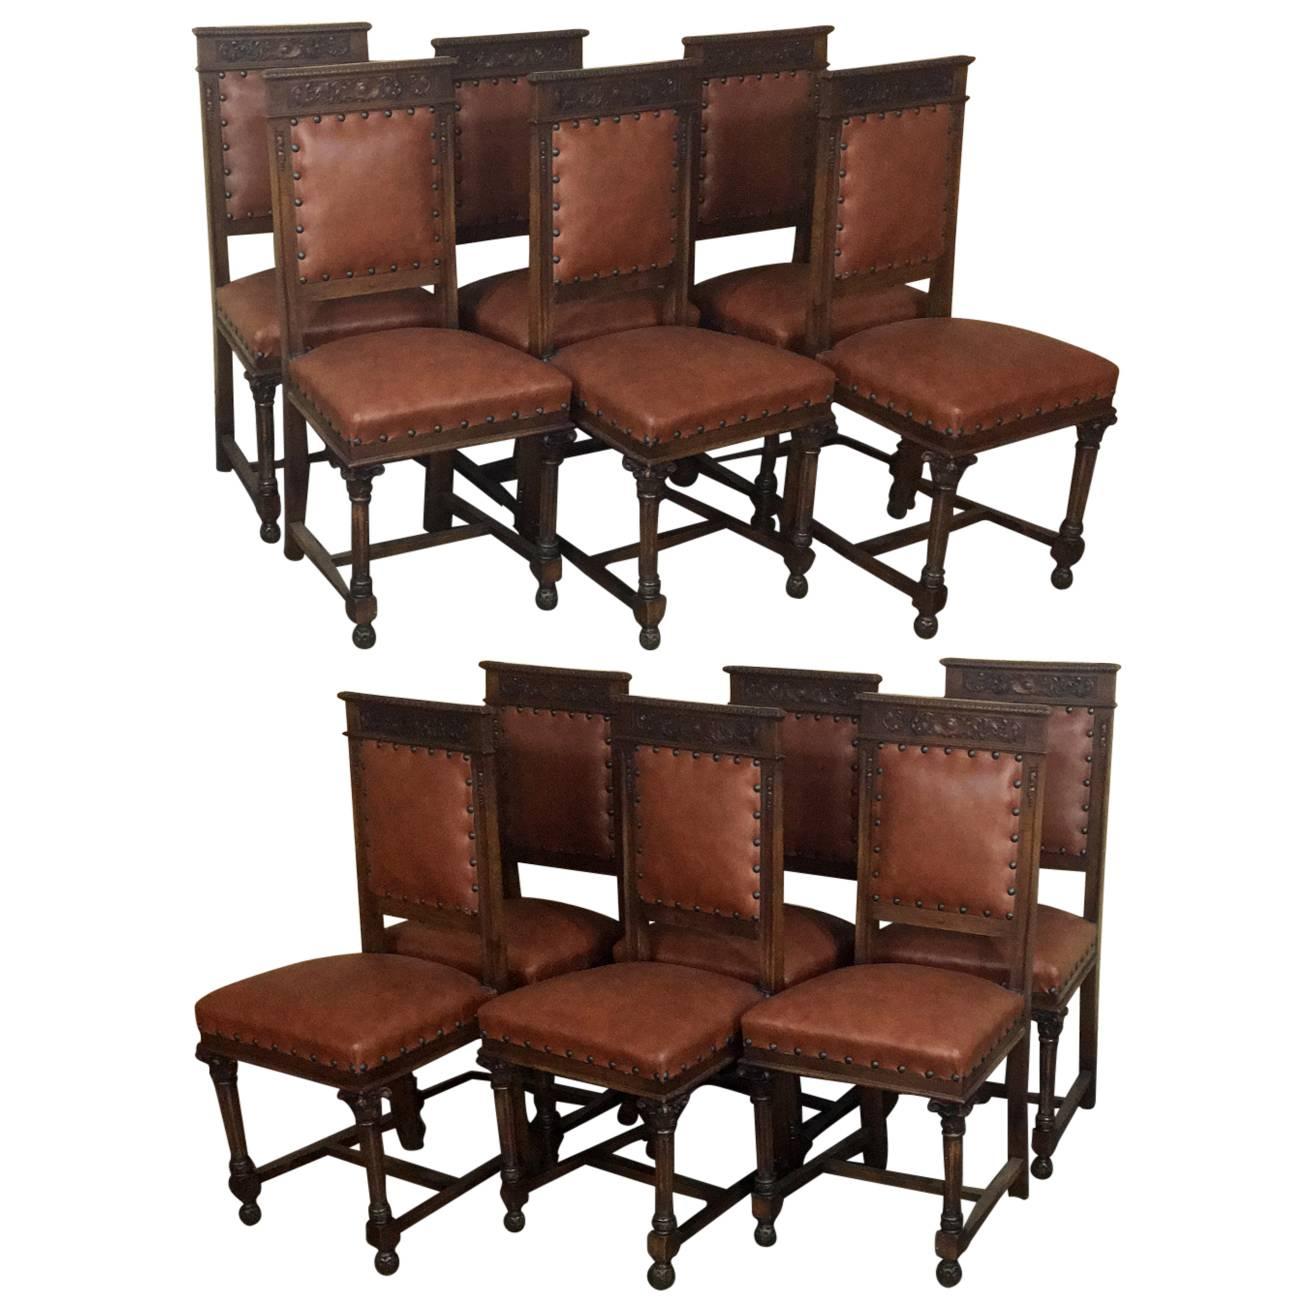 Set of Twelve Italian Neoclassical Hand-Carved Walnut Chairs with Leather